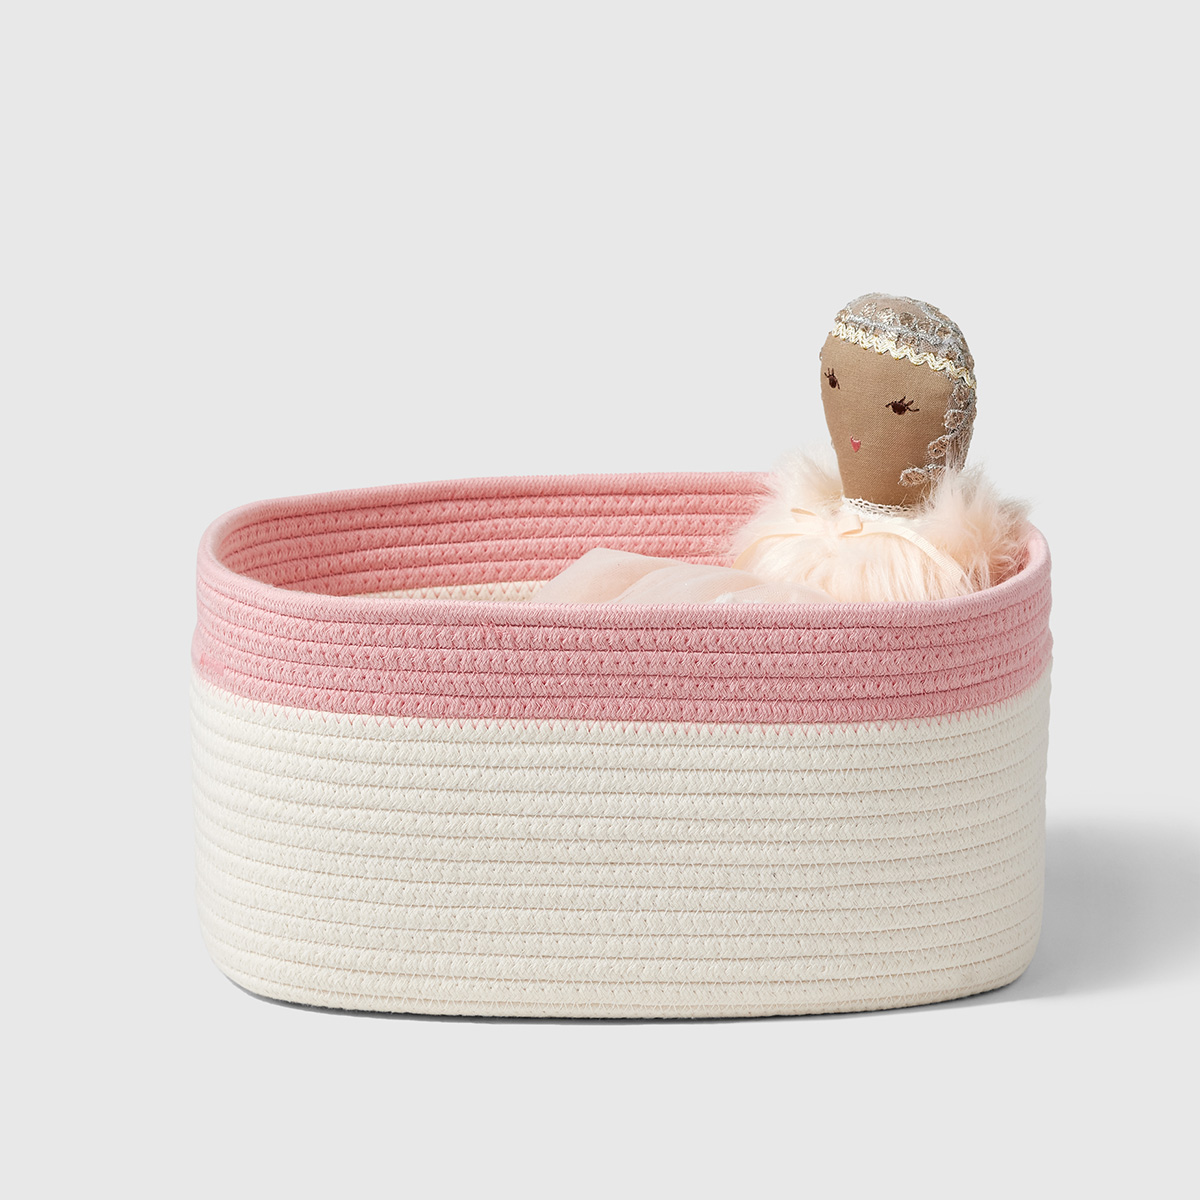 Marie Kondo Sage Green Small Kawaii Cotton Rope Bin | The Container Store